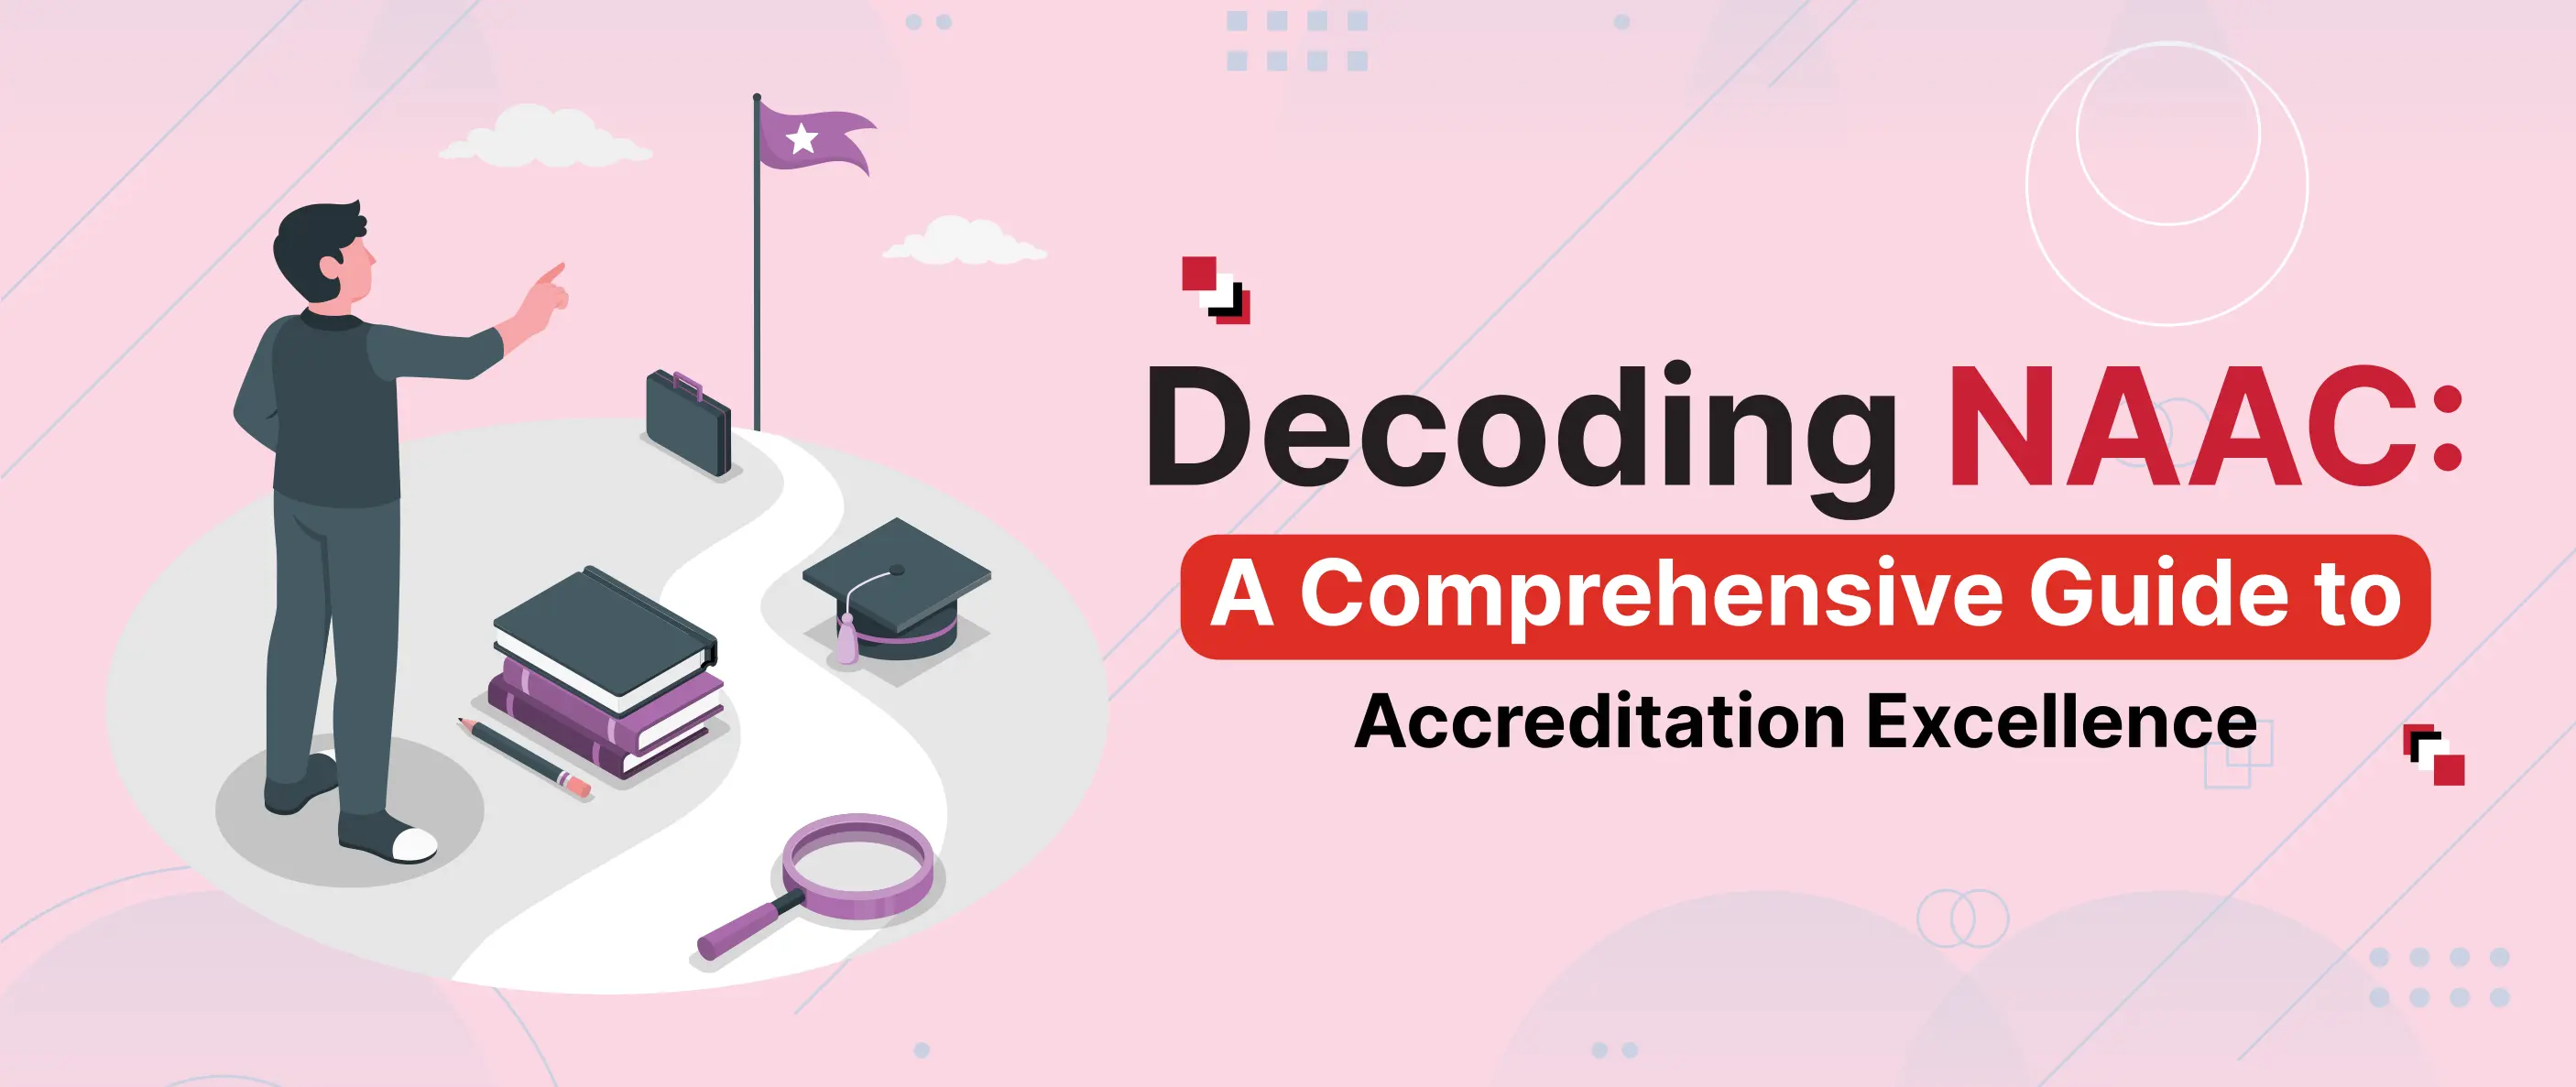 Decoding NAAC: A Comprehensive Guide to Accreditation Excellence